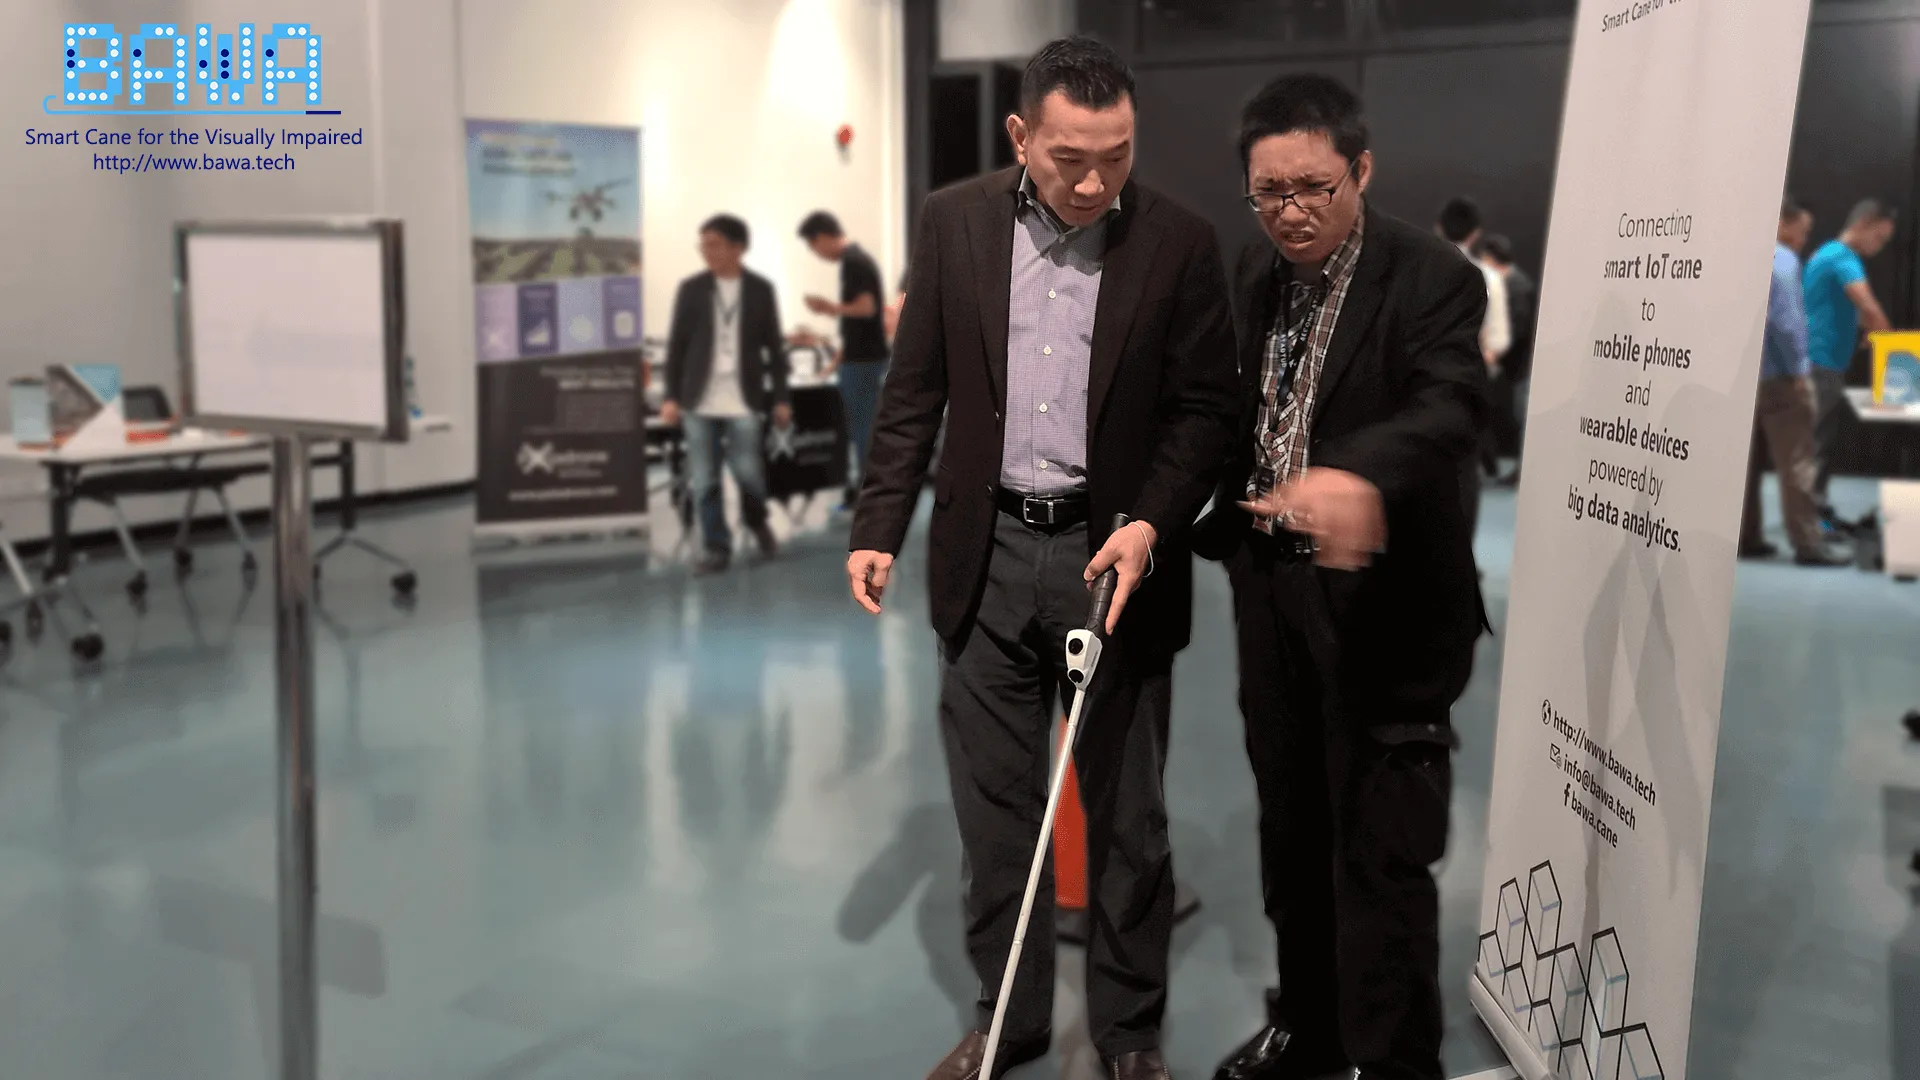 Dato Loh Yuen Tuck from The IoT Solutions Sdn Bhd listens on while Daniel Vong is explaining how to use a white cane.